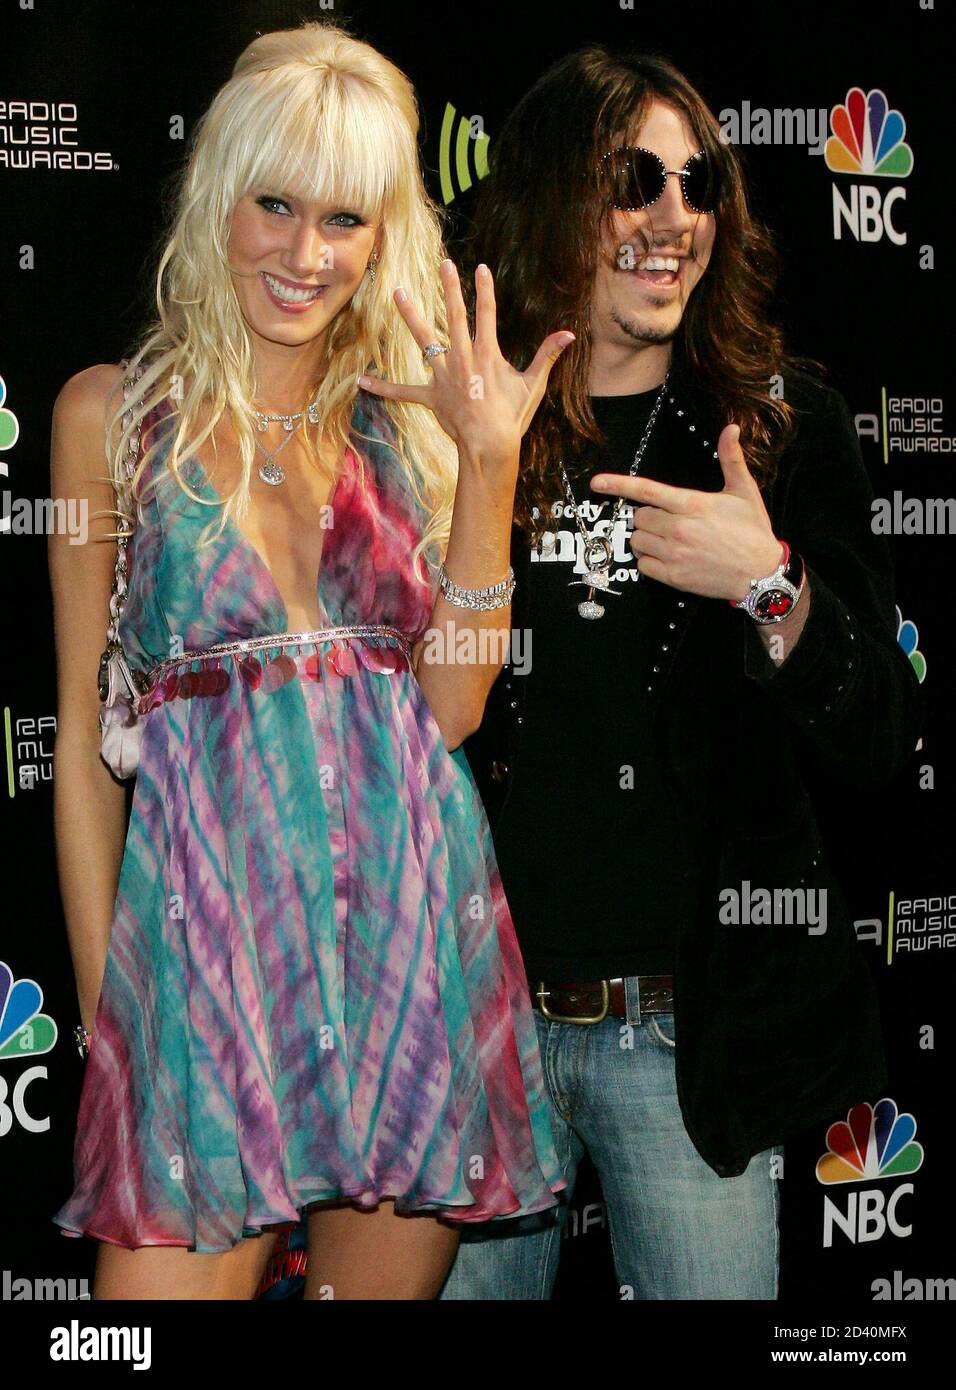 Kimberly Stewart, [daughter of musician Rod Stewart], and her fiance Cisco Adler show off Stewart's new ring as they arrive at the Radio Music Awards at the Aladdin Theatre for the Performing Arts in Las Vegas, Nevada October 25, 2004. Stock Photo